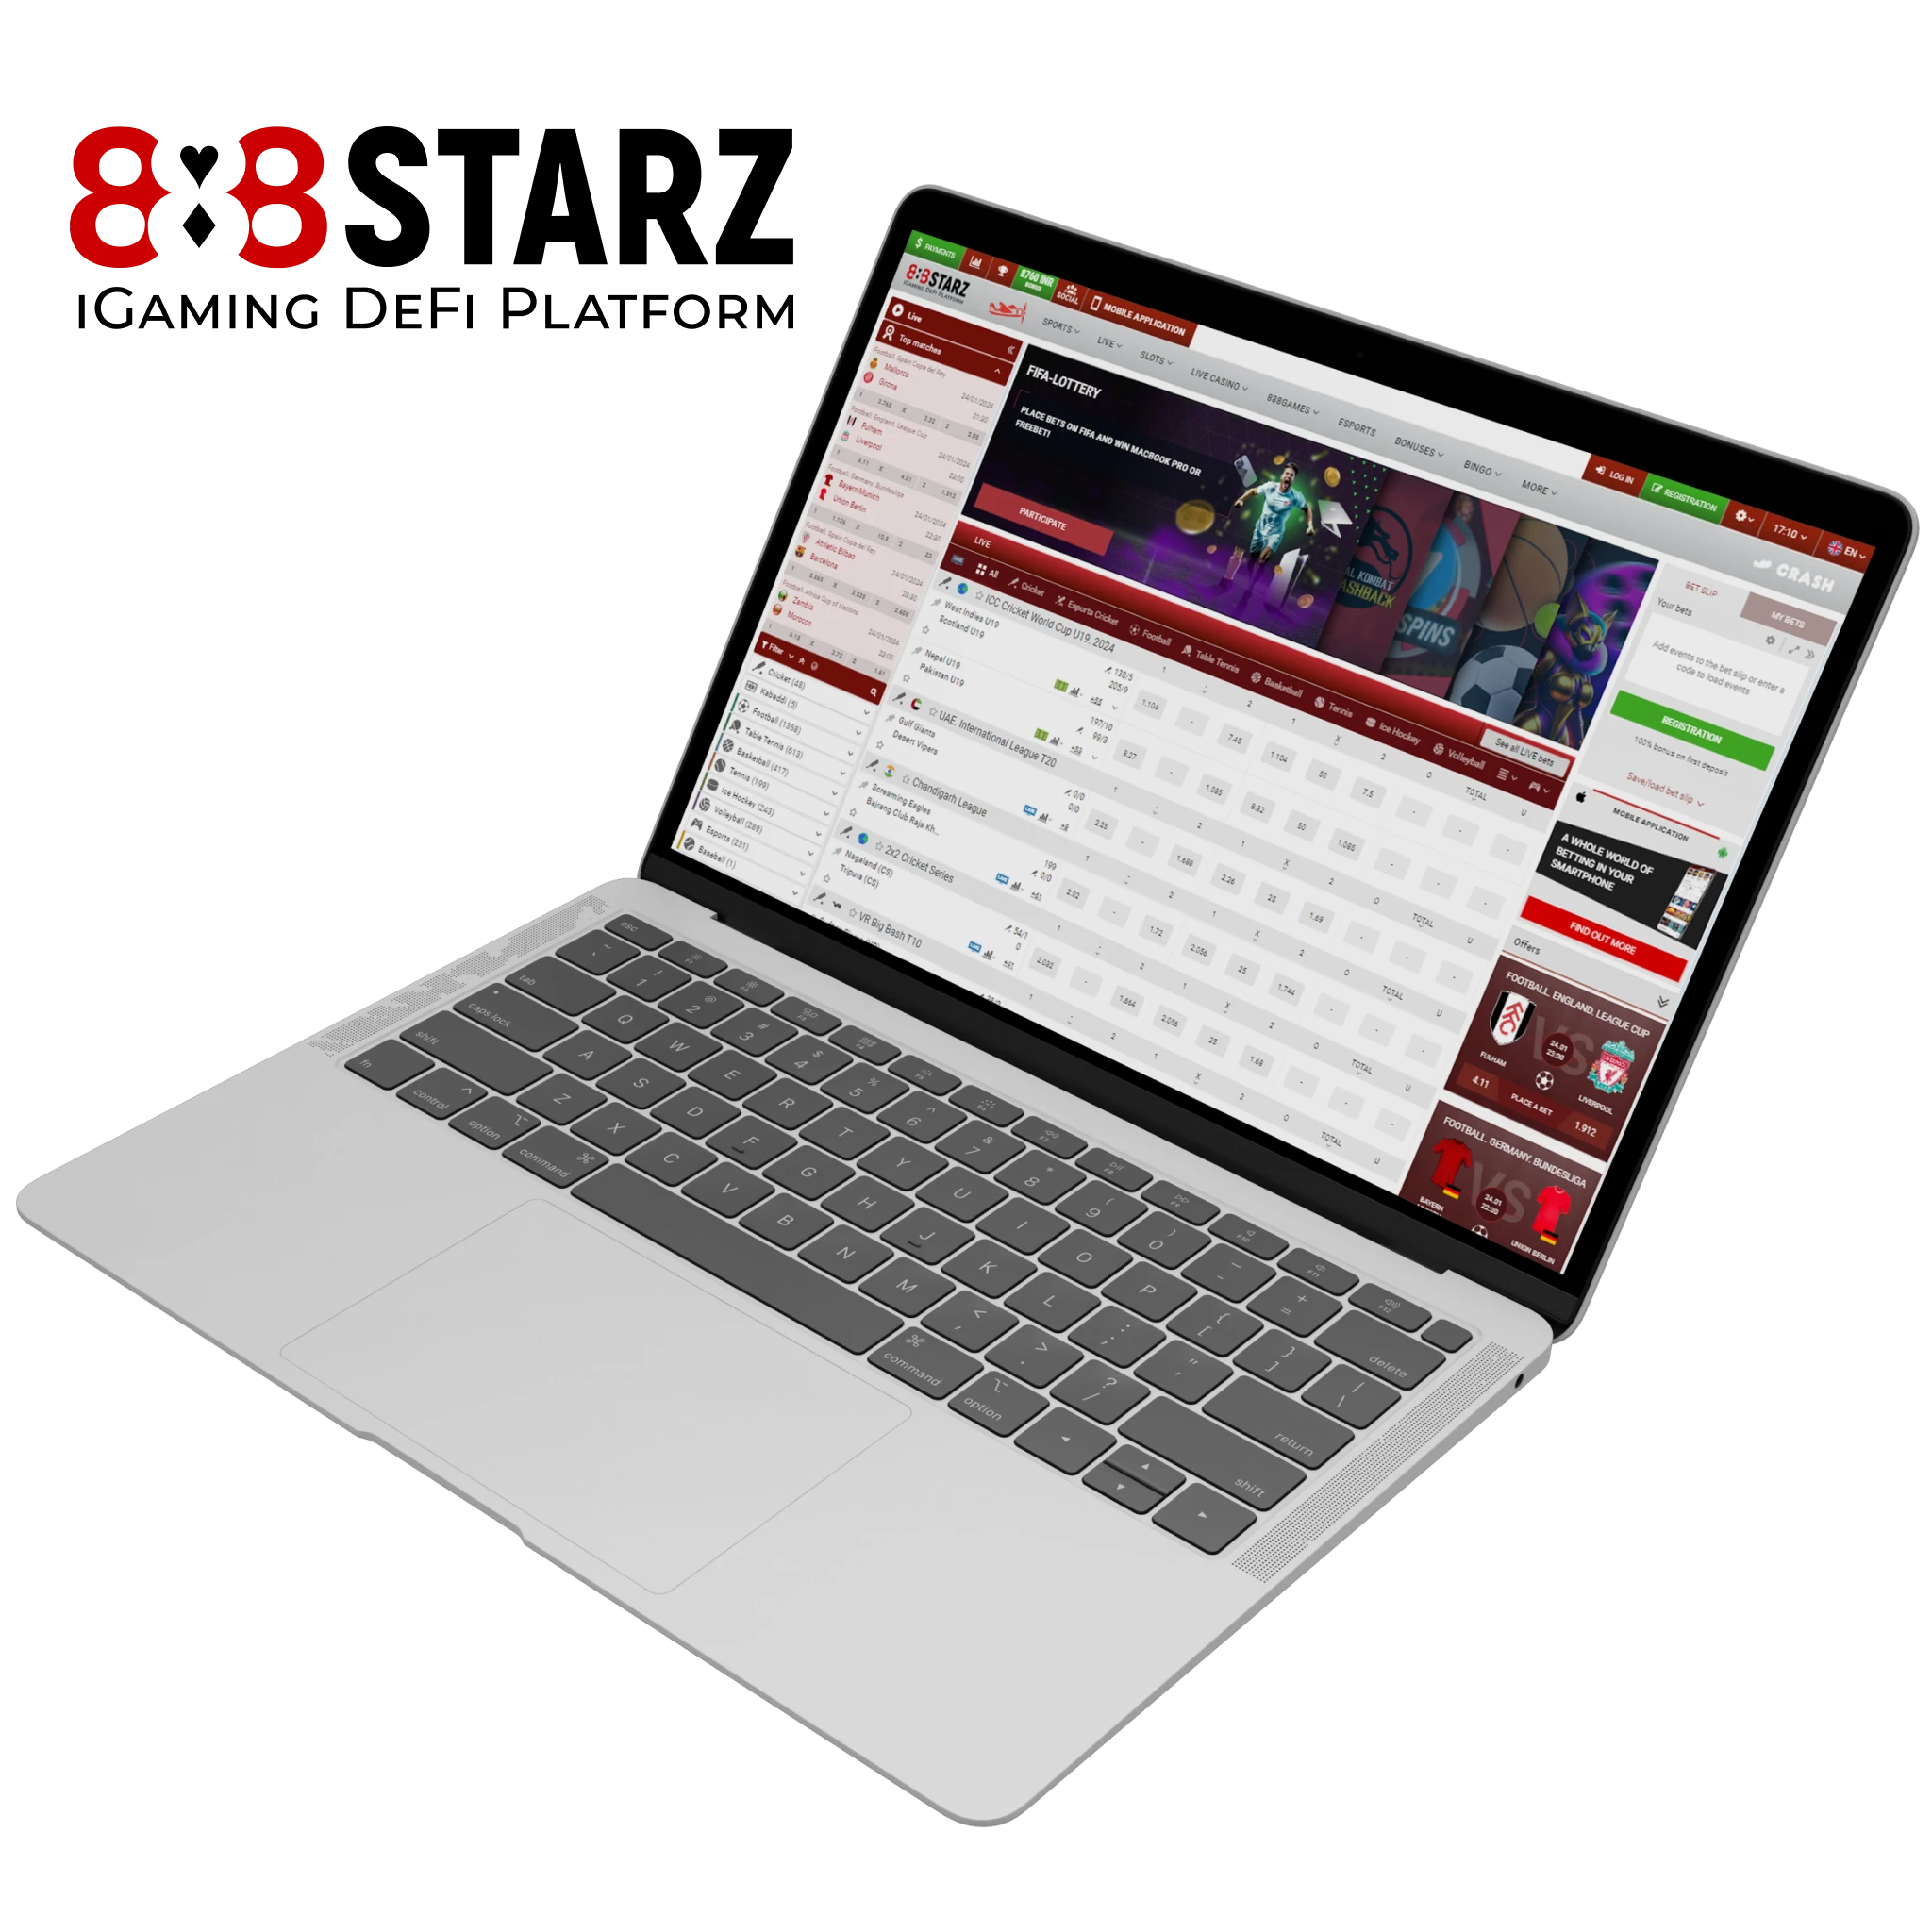 888starz site for sports betting.